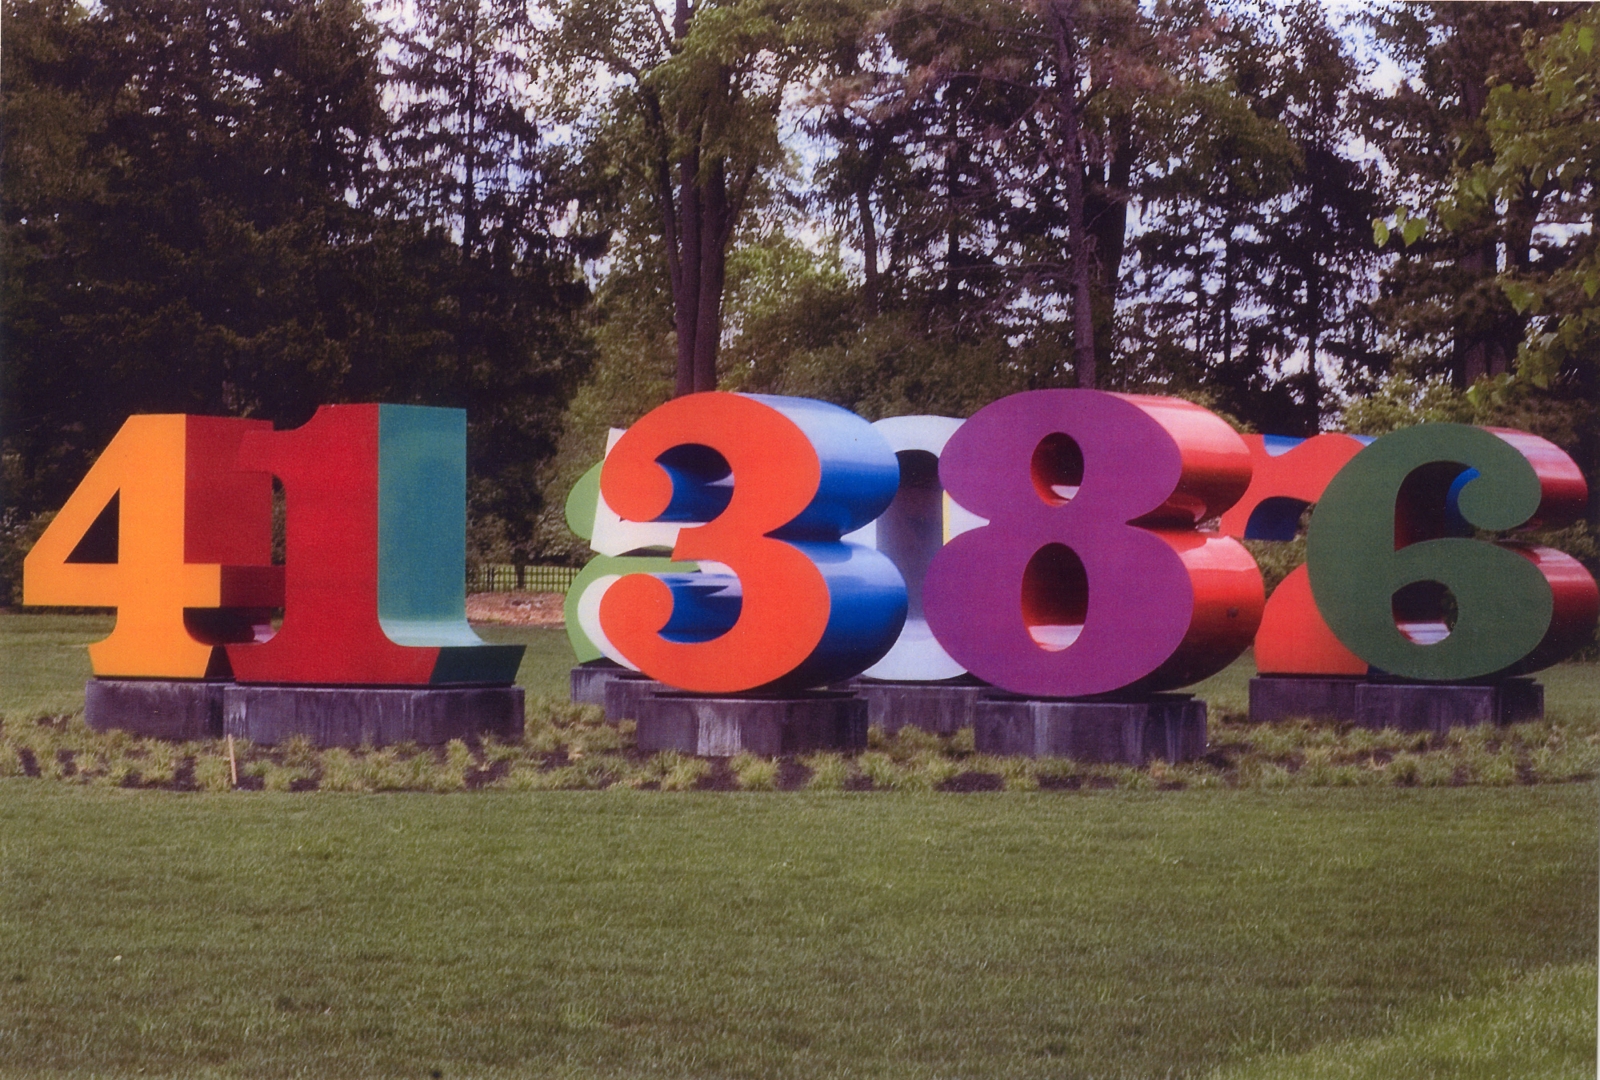 Installation view of ONE Through ZERO (The Ten Numbers) (1980) at the Indianapolis Museum of Art, 1989. Image courtesy of the Indianapolis Museum of Art at Newfields